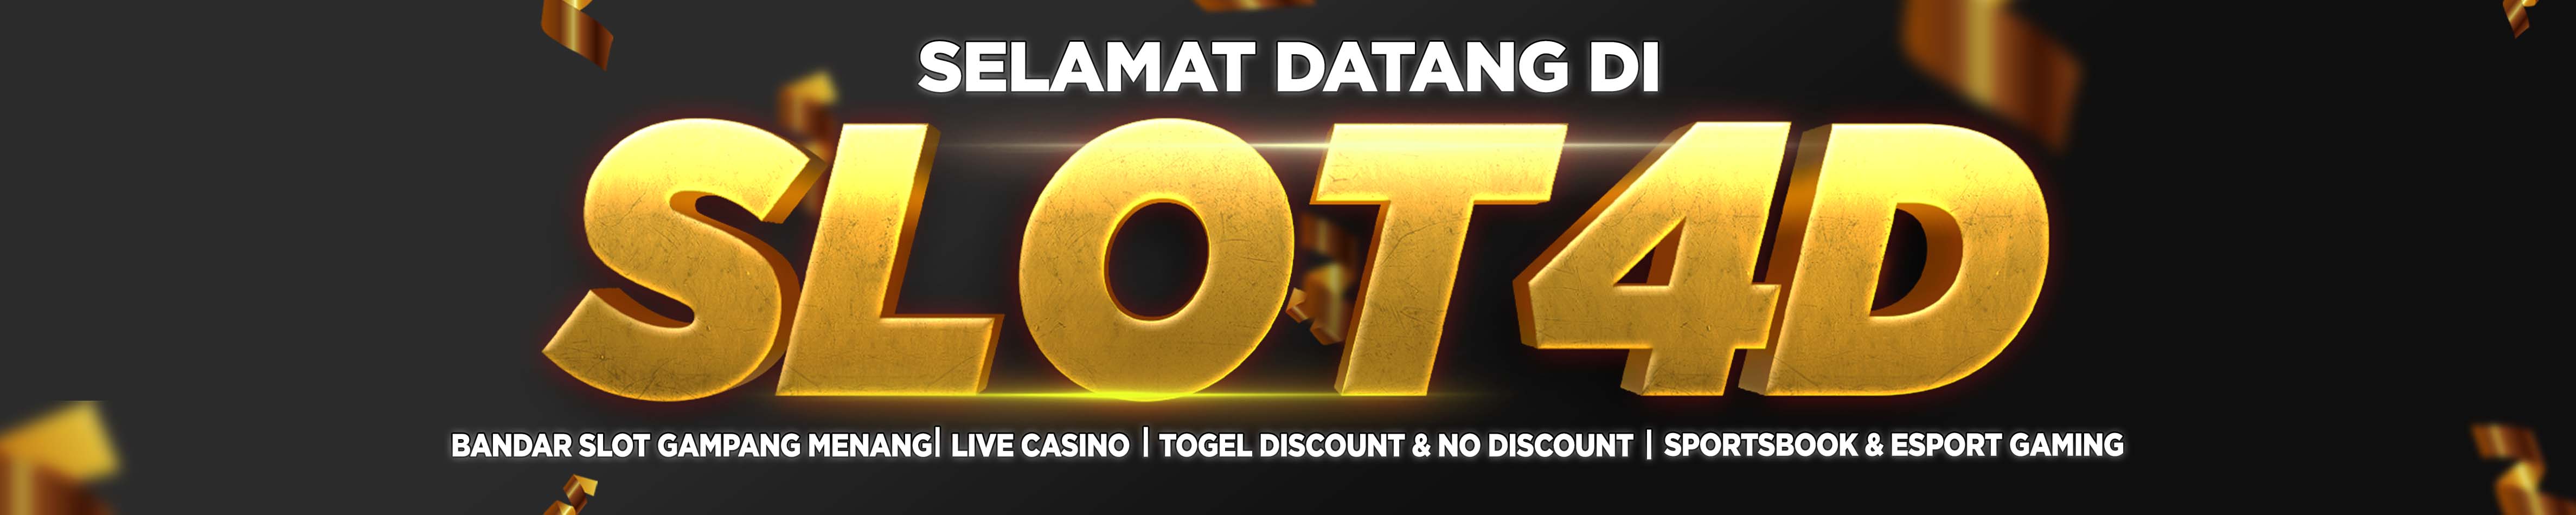 Slot4d welcome